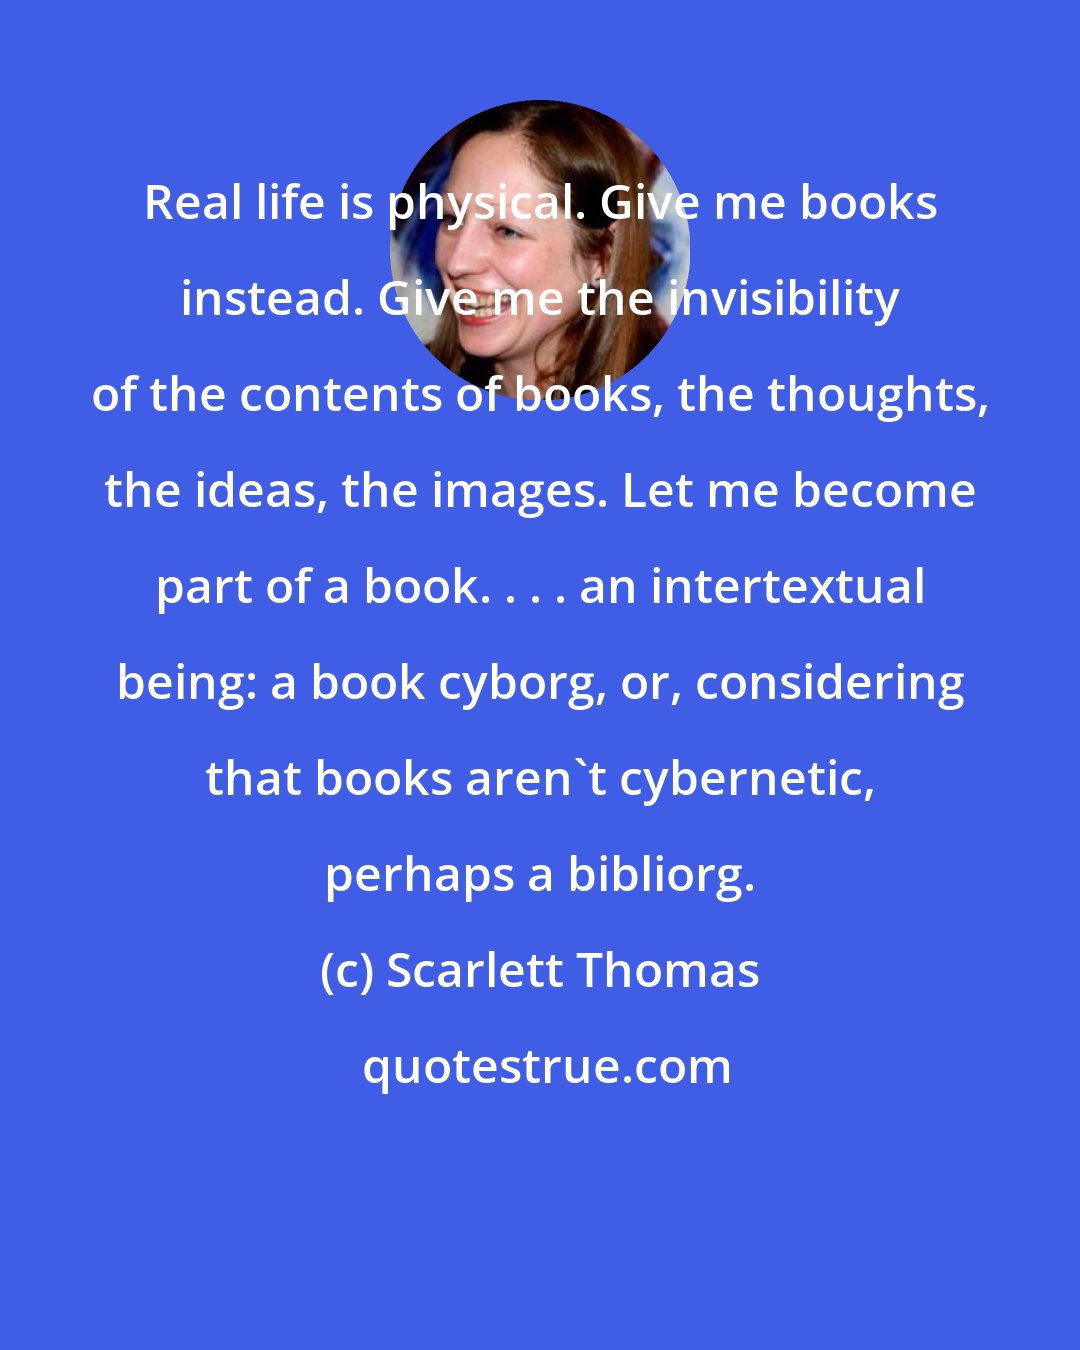 Scarlett Thomas: Real life is physical. Give me books instead. Give me the invisibility of the contents of books, the thoughts, the ideas, the images. Let me become part of a book. . . . an intertextual being: a book cyborg, or, considering that books aren't cybernetic, perhaps a bibliorg.